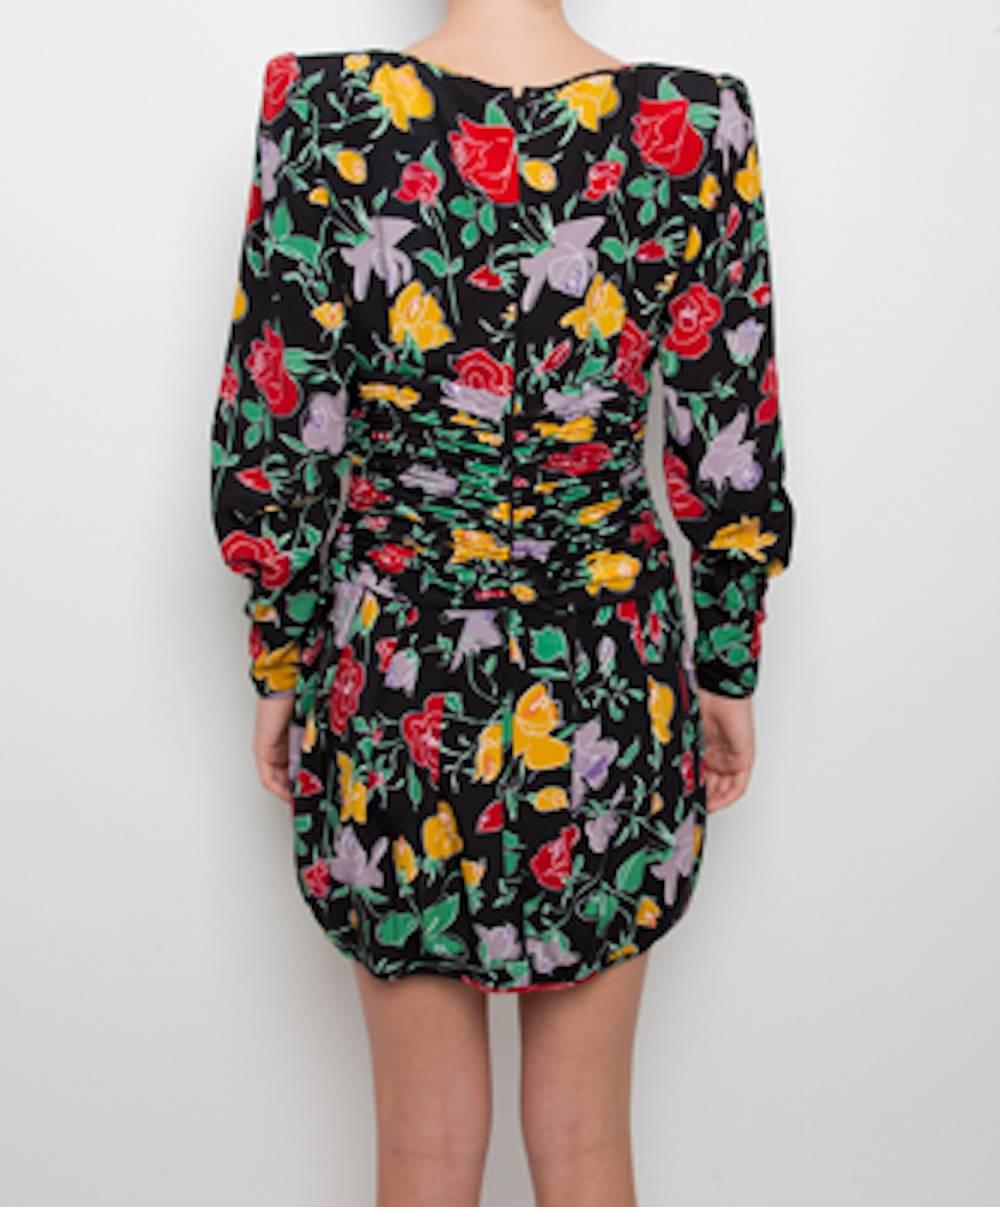 Ungaro dresses are known for their flamboyant patterns and elegant draping with an emphasis on the comfortable and flattering encasement of the female form. These dresses are truly vintage pieces. 
Black dress with red, yellow and green rose print.